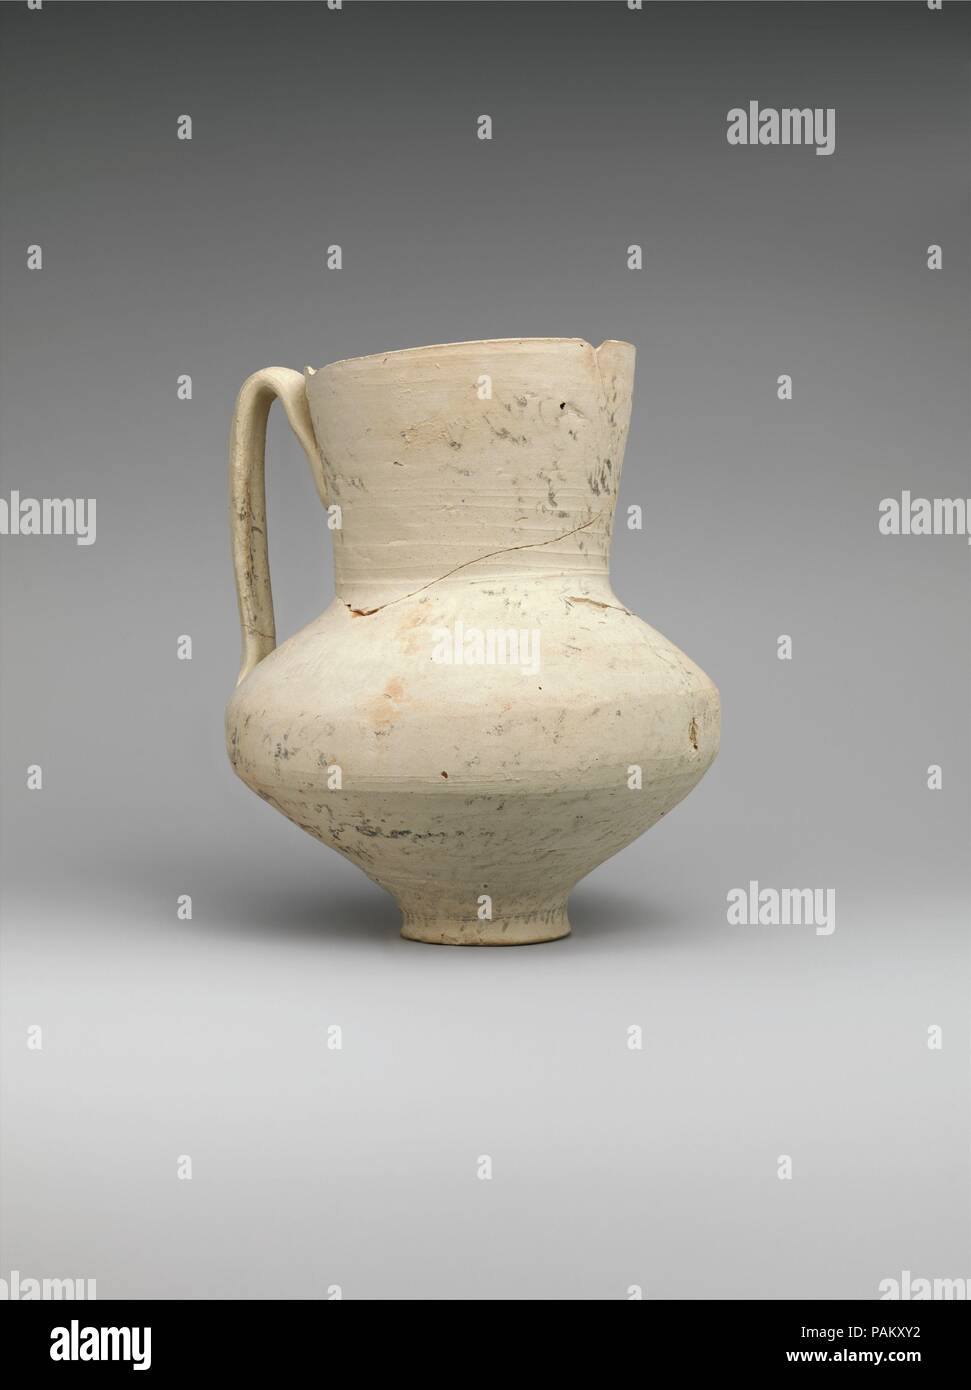 Unglazed Jug with Writing. Dimensions: H. 6 3/4 in. (17.1 cm)  Diam. 5 5/8 in. (14.3 cm). Date: 8th-9th century.  This jug's entire surface is covered with writing, and the faint image of a demon can be discerned on the shoulder. While quite unusual for the Islamic period, this combination of features can be found on a group of sixth- and seventh-century ceramics known as incantation bowls. These bowls were supposed to rid their owners of ailments or to exorcize demons from their homes, and were inscribed with curses in Aramaic, Syriac, and Mandaic. The few known examples of such ceramics from Stock Photo